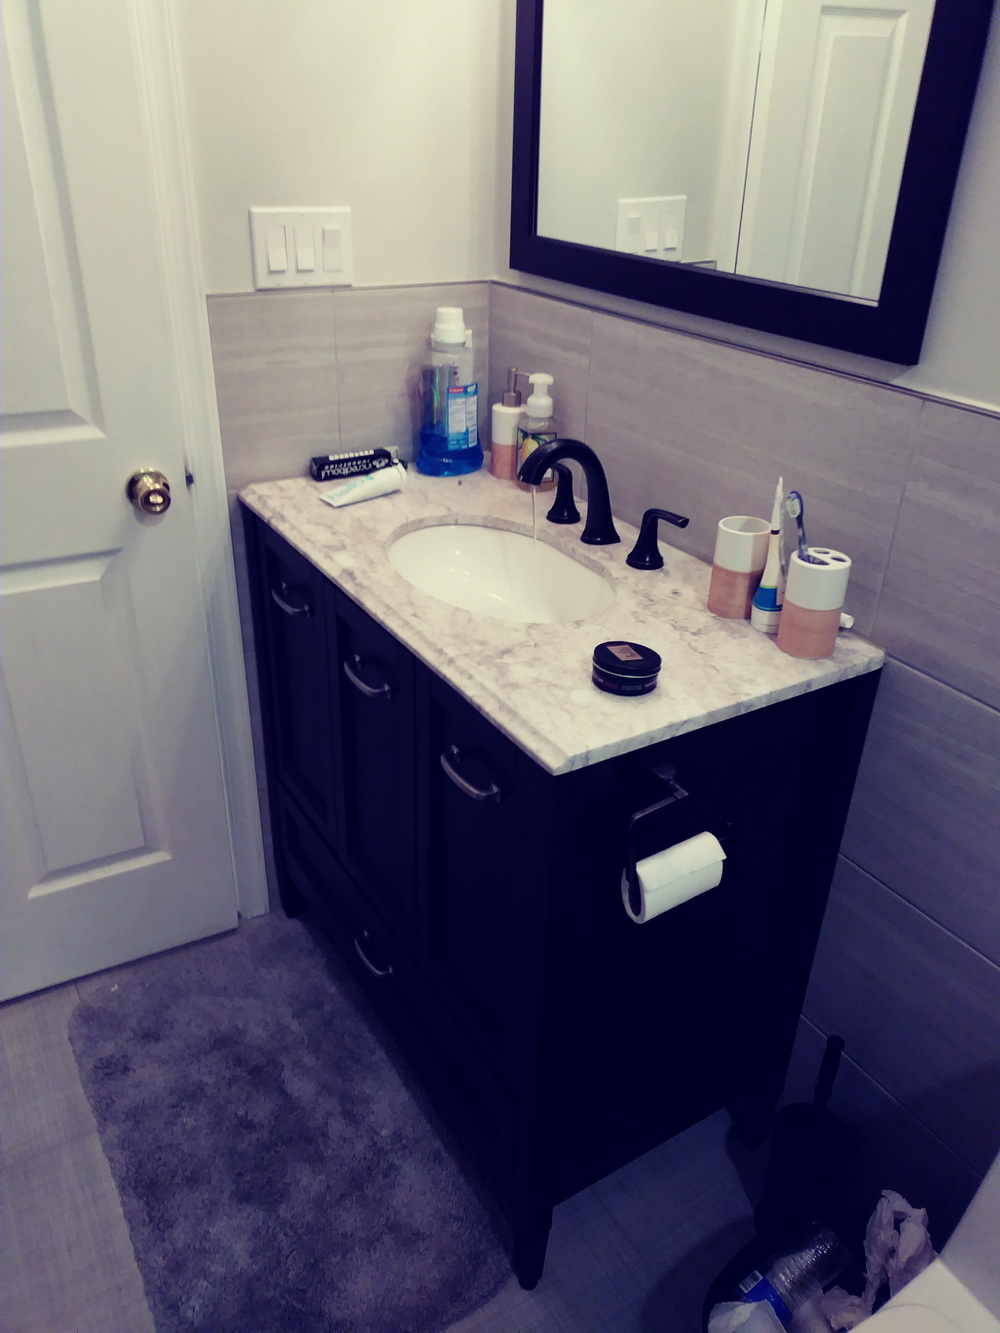 Wash Basin with Cabinet